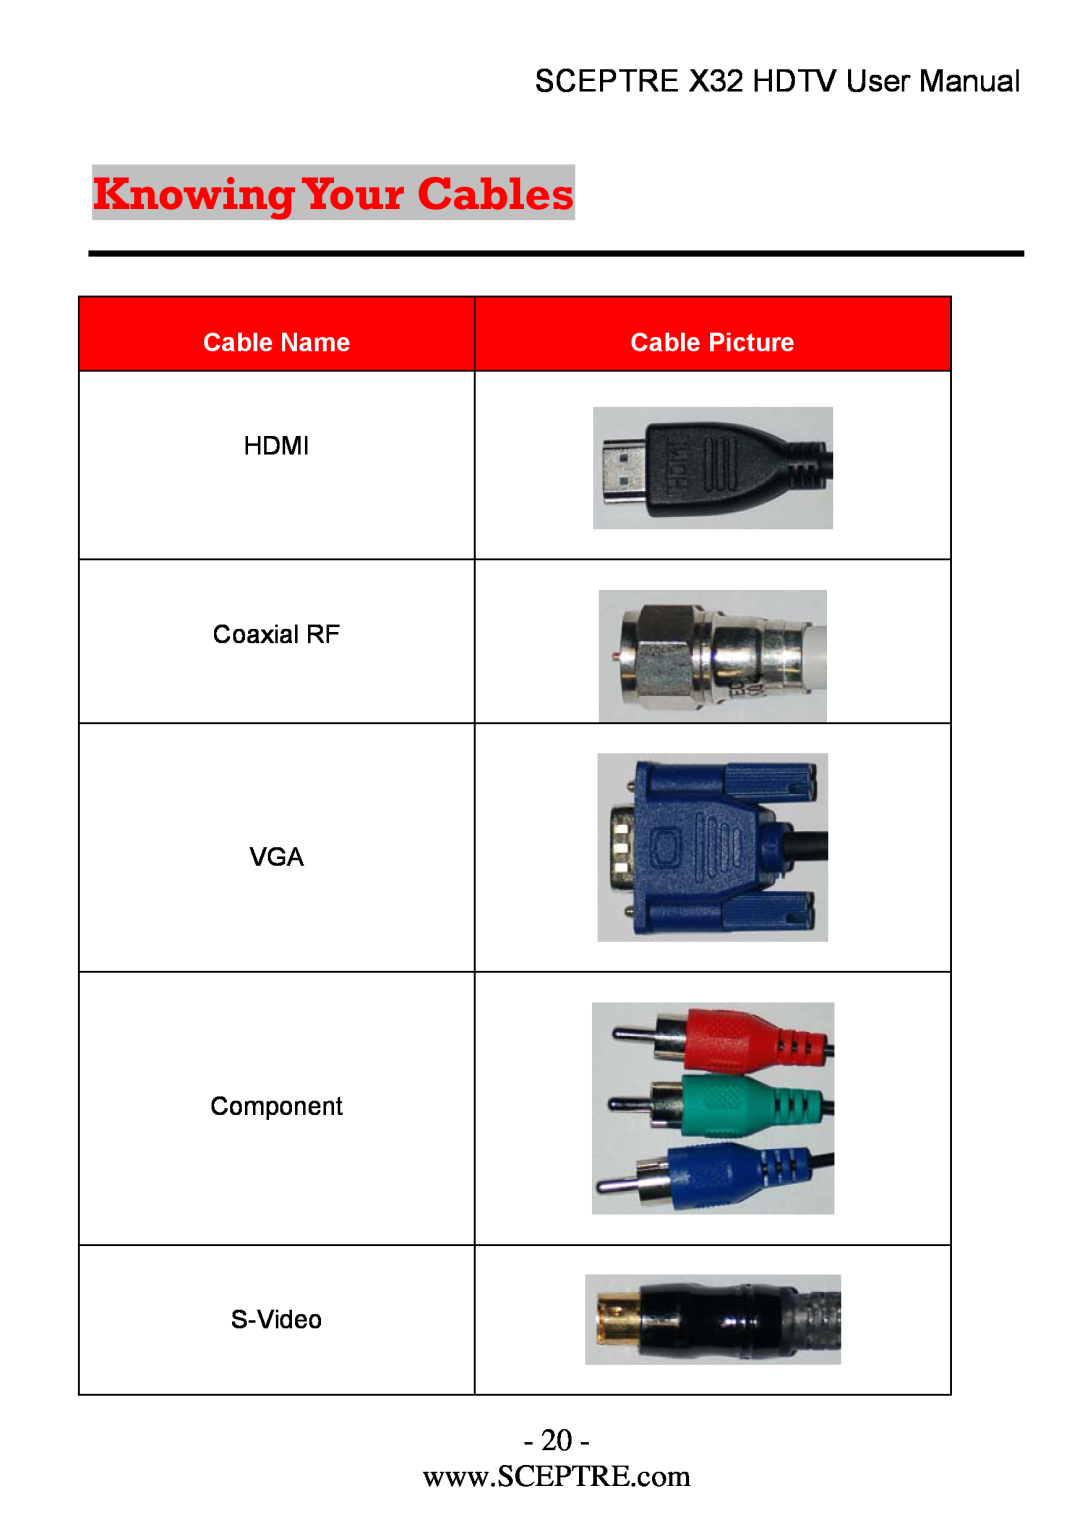 Sceptre Technologies x32 user manual Knowing Your Cables, SCEPTRE X32 HDTV User Manual, Cable Name, Cable Picture 